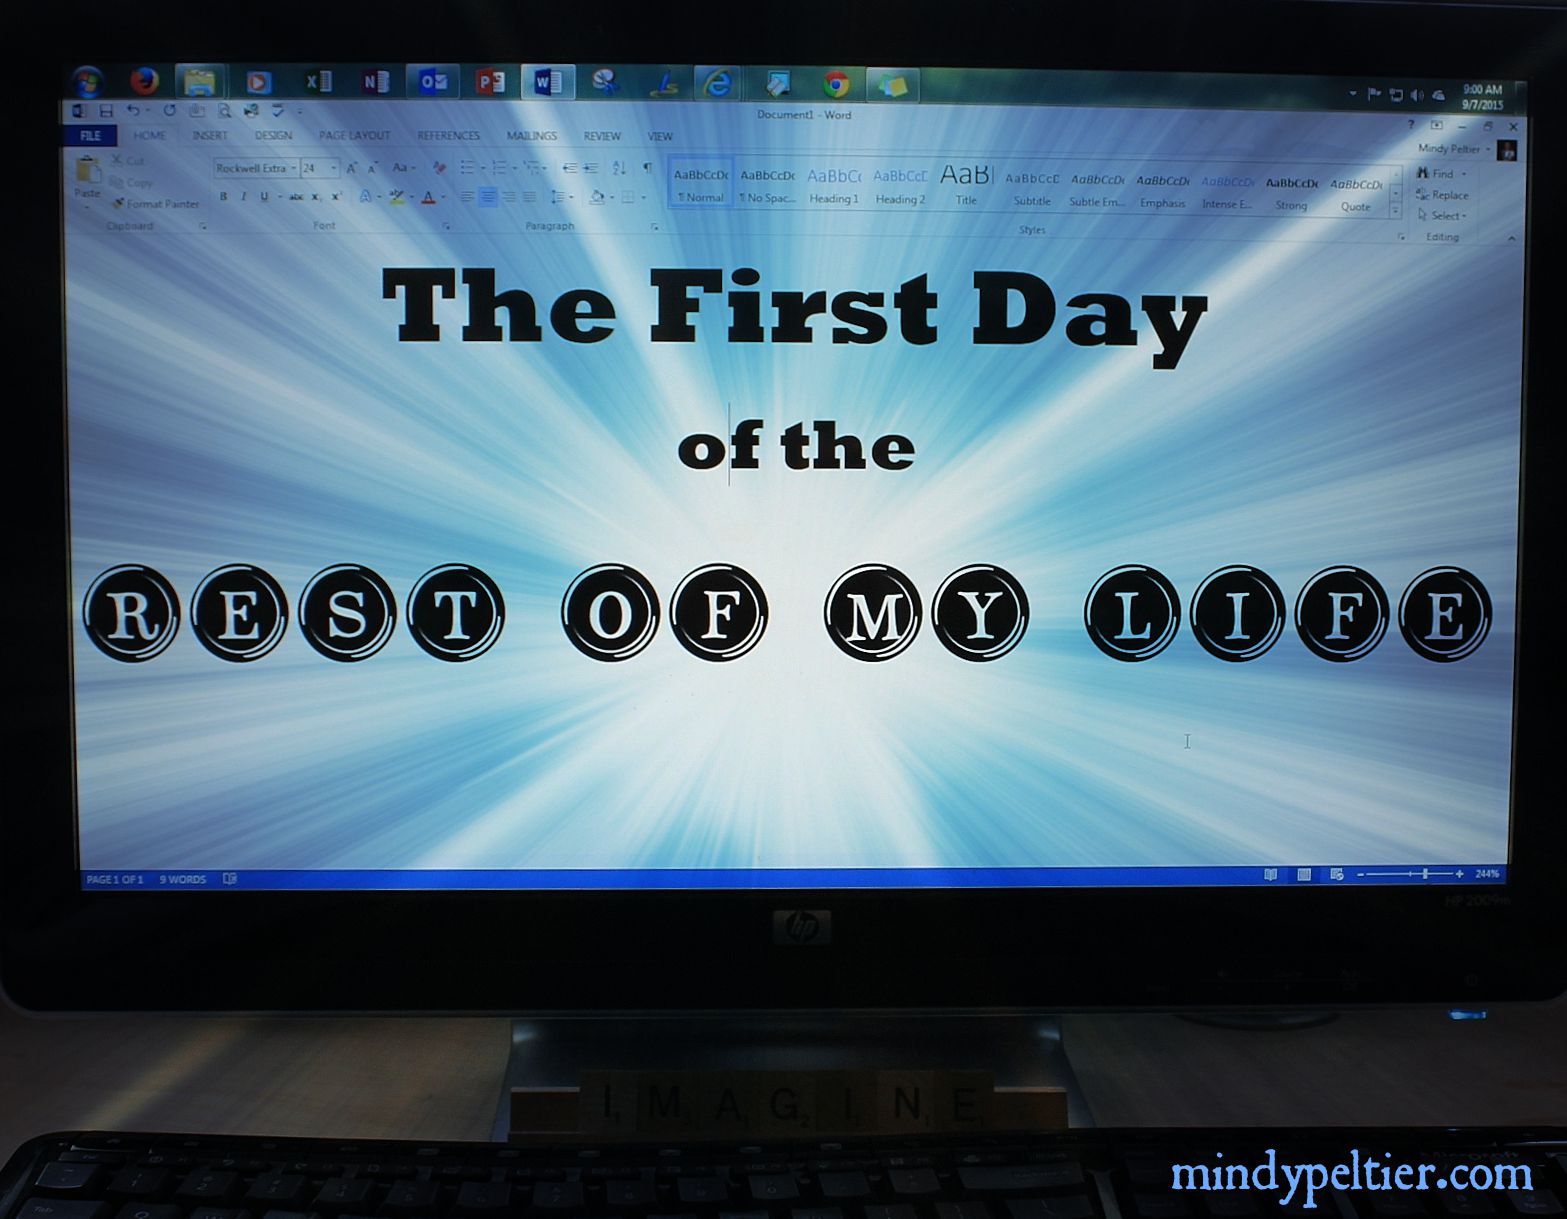 The First Day of the Rest of My Life